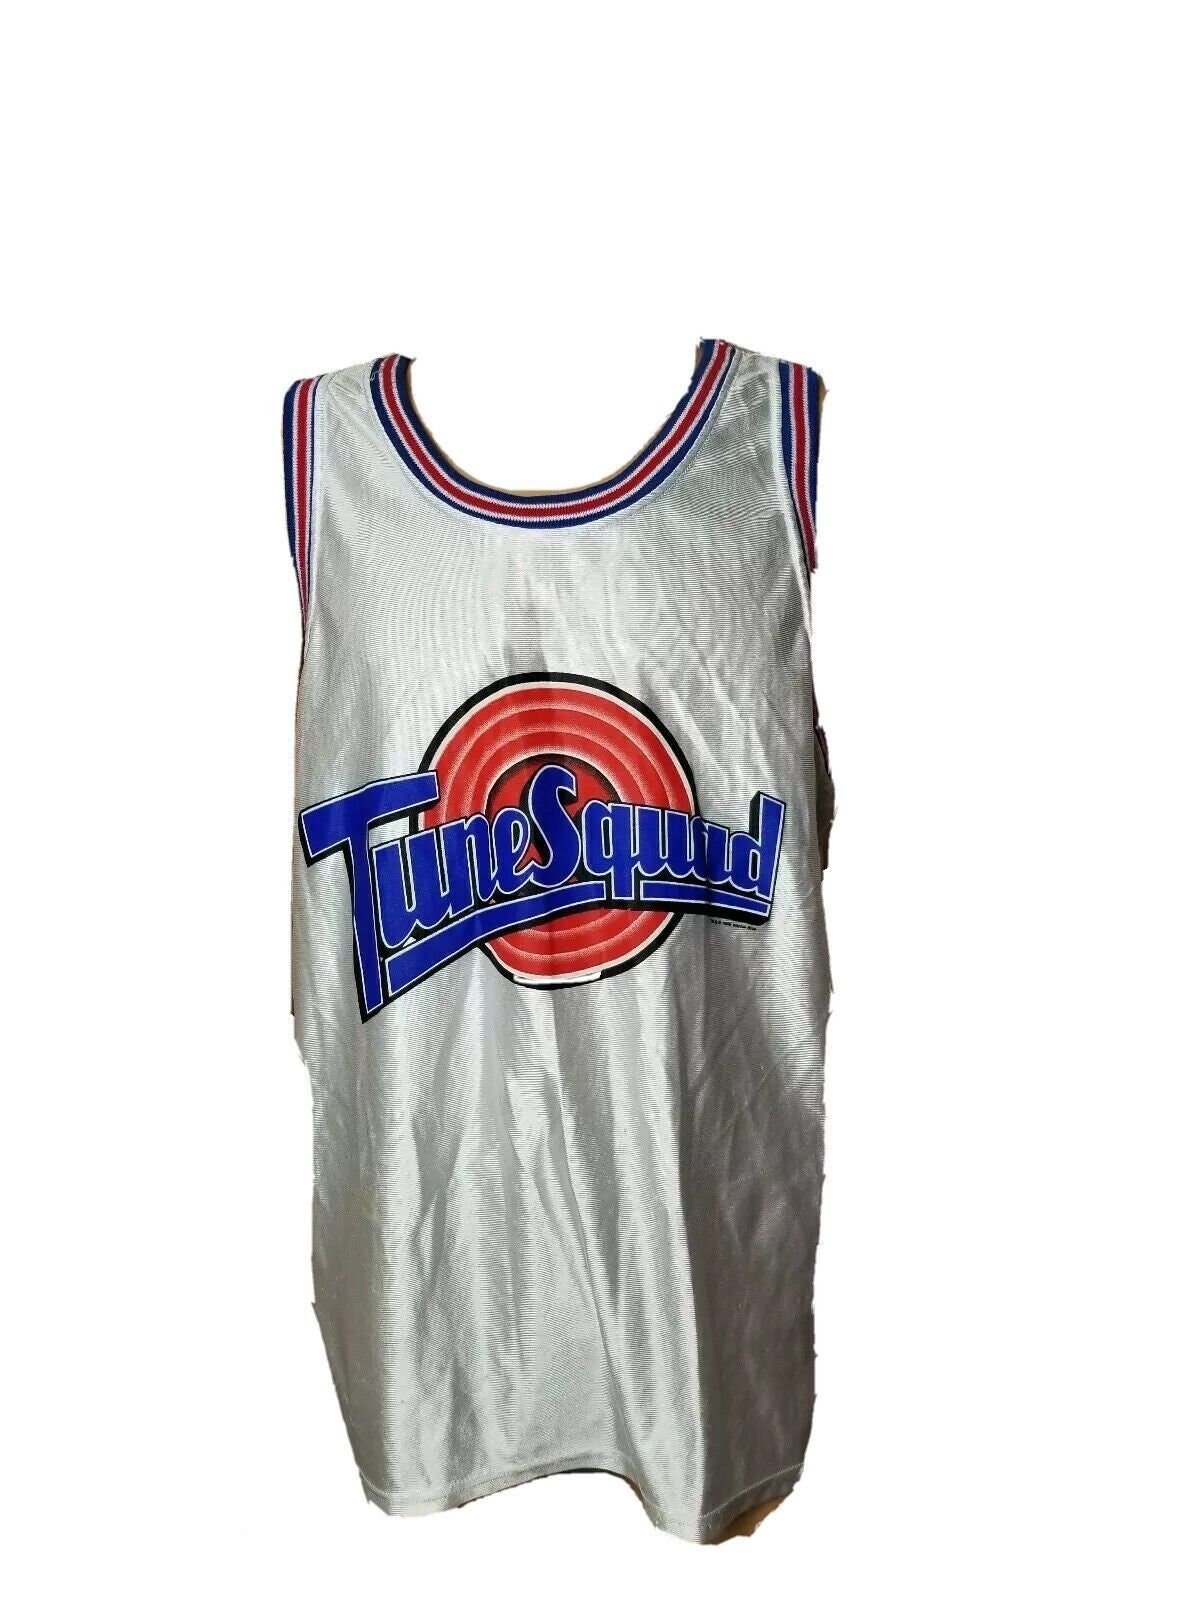 NBA TUNES SQUAD - TASMANIAN DEVIL LOONEY TUNES SPACE JAM CODE DLMT004 FULL  SUBLIMATION JERSEY (FREE CHANGE TEAM NAME, SURNAME & NUMBER